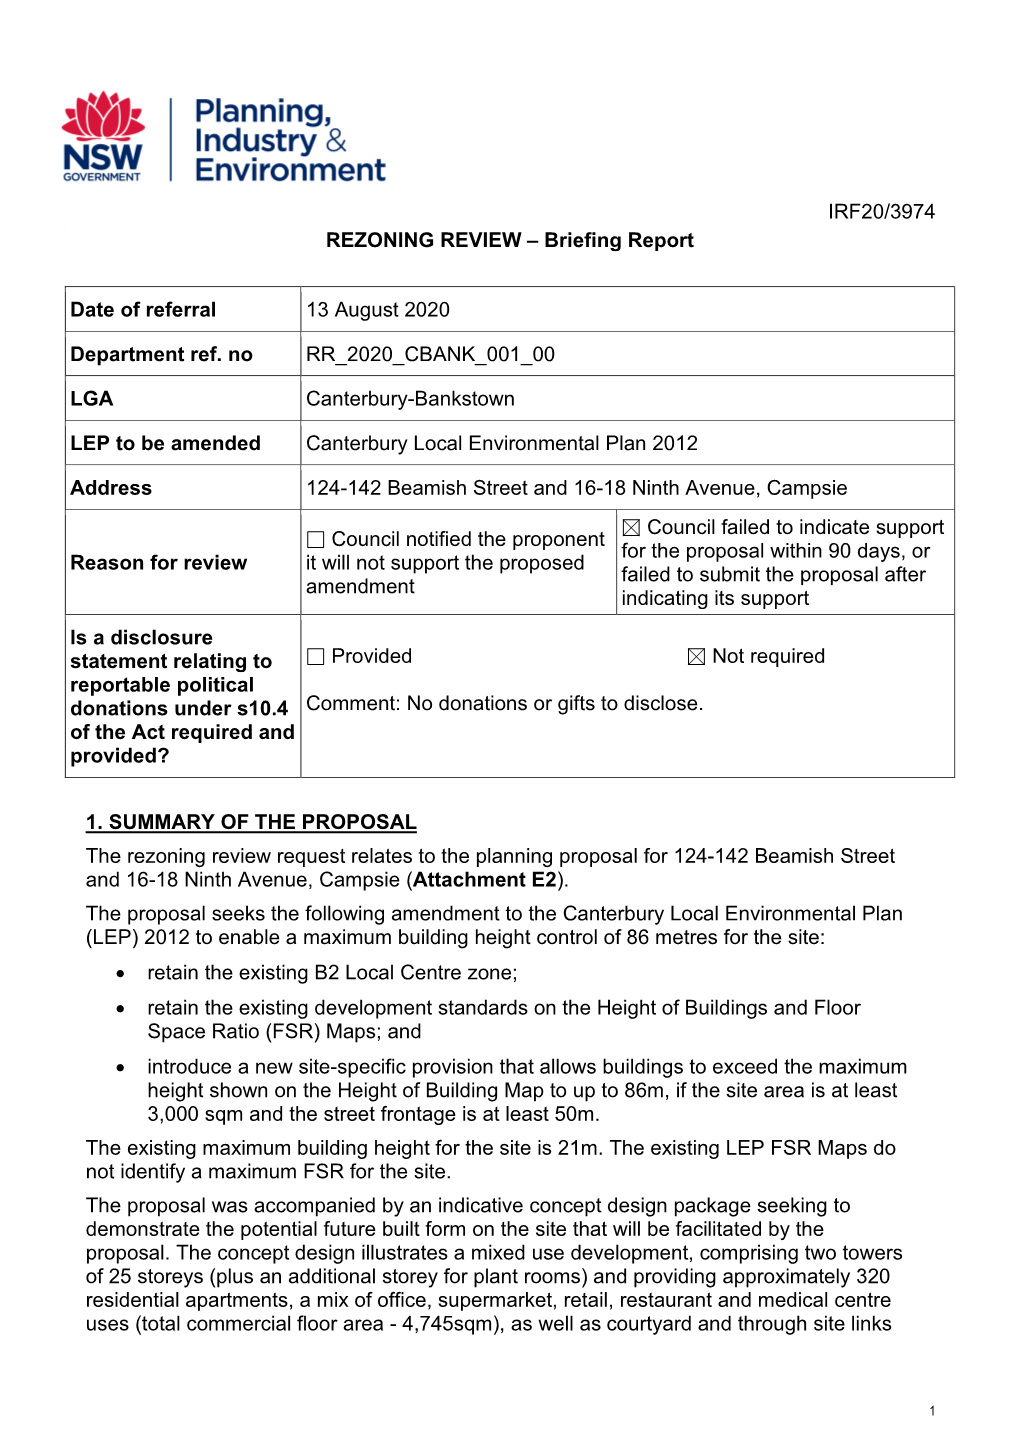 IRF20/3974 1. SUMMARY of the PROPOSAL the Rezoning Review